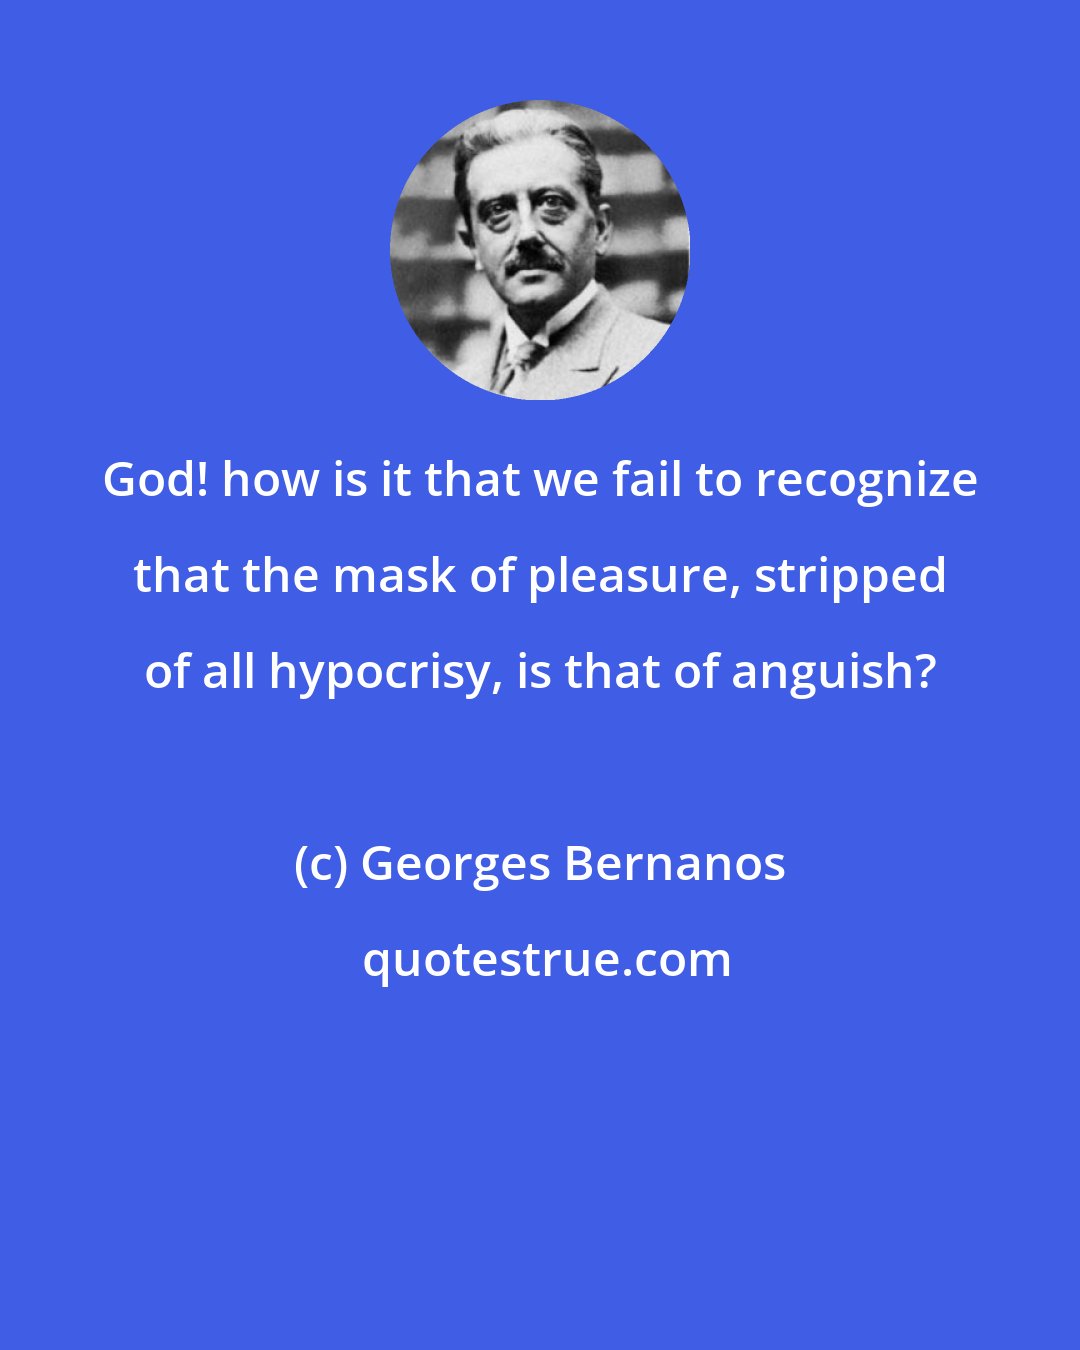 Georges Bernanos: God! how is it that we fail to recognize that the mask of pleasure, stripped of all hypocrisy, is that of anguish?